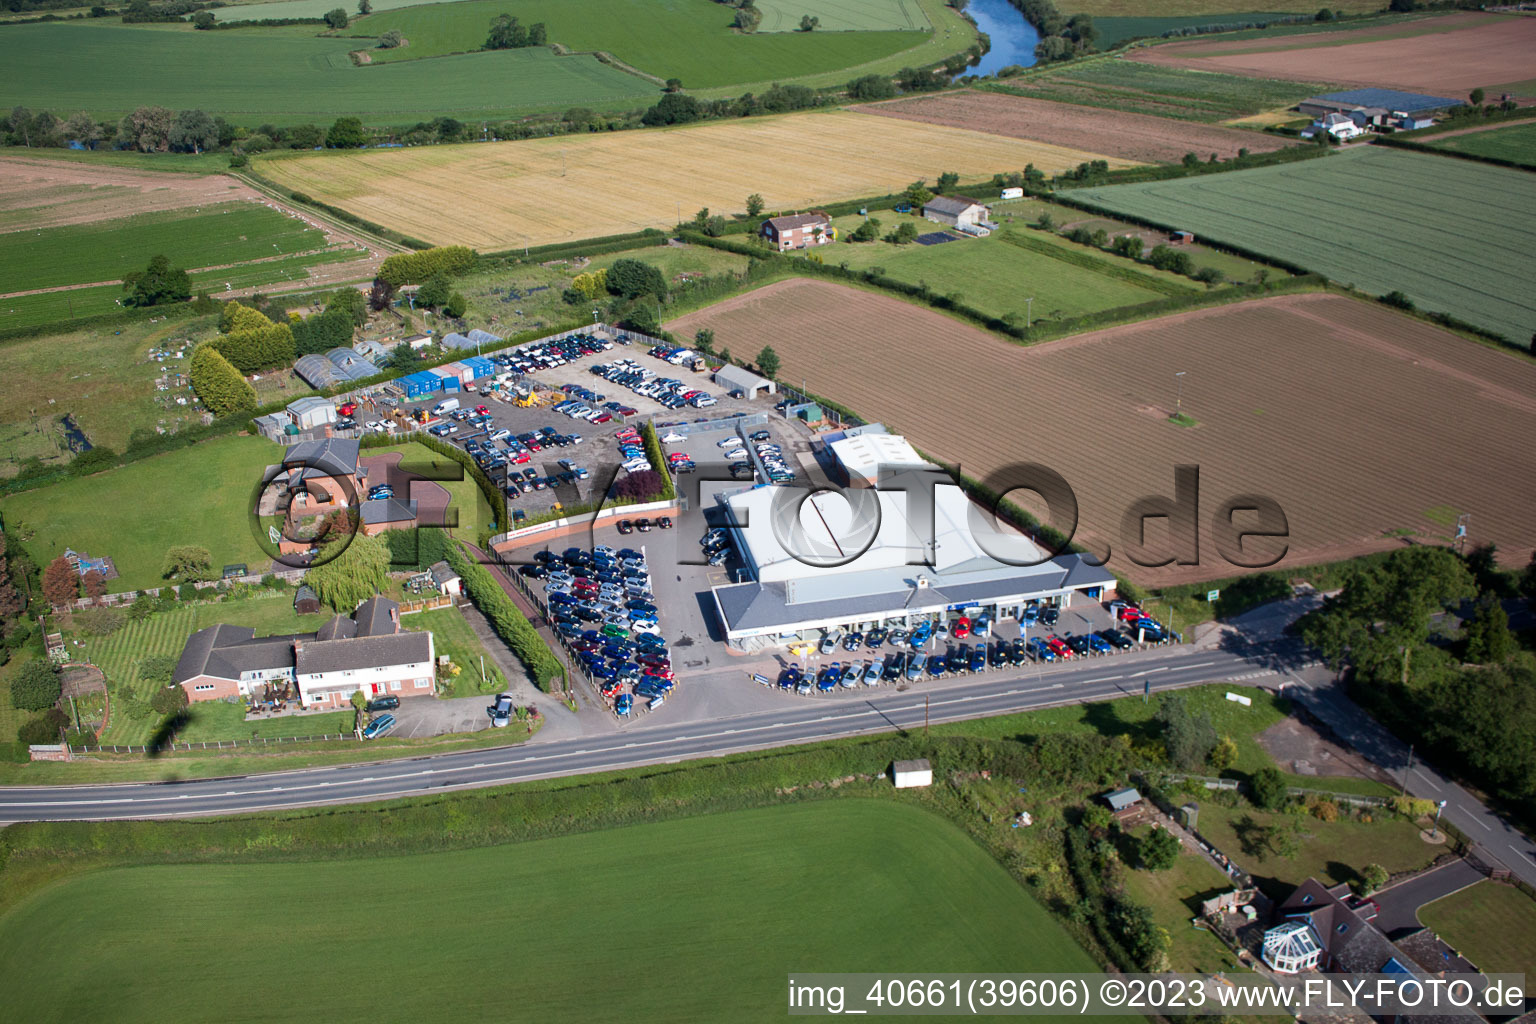 Edwards Hyundai Baynhall Garage 19 Main Road Kempsey Worcester, Worcestershire in Draycott in the state England, Great Britain from above